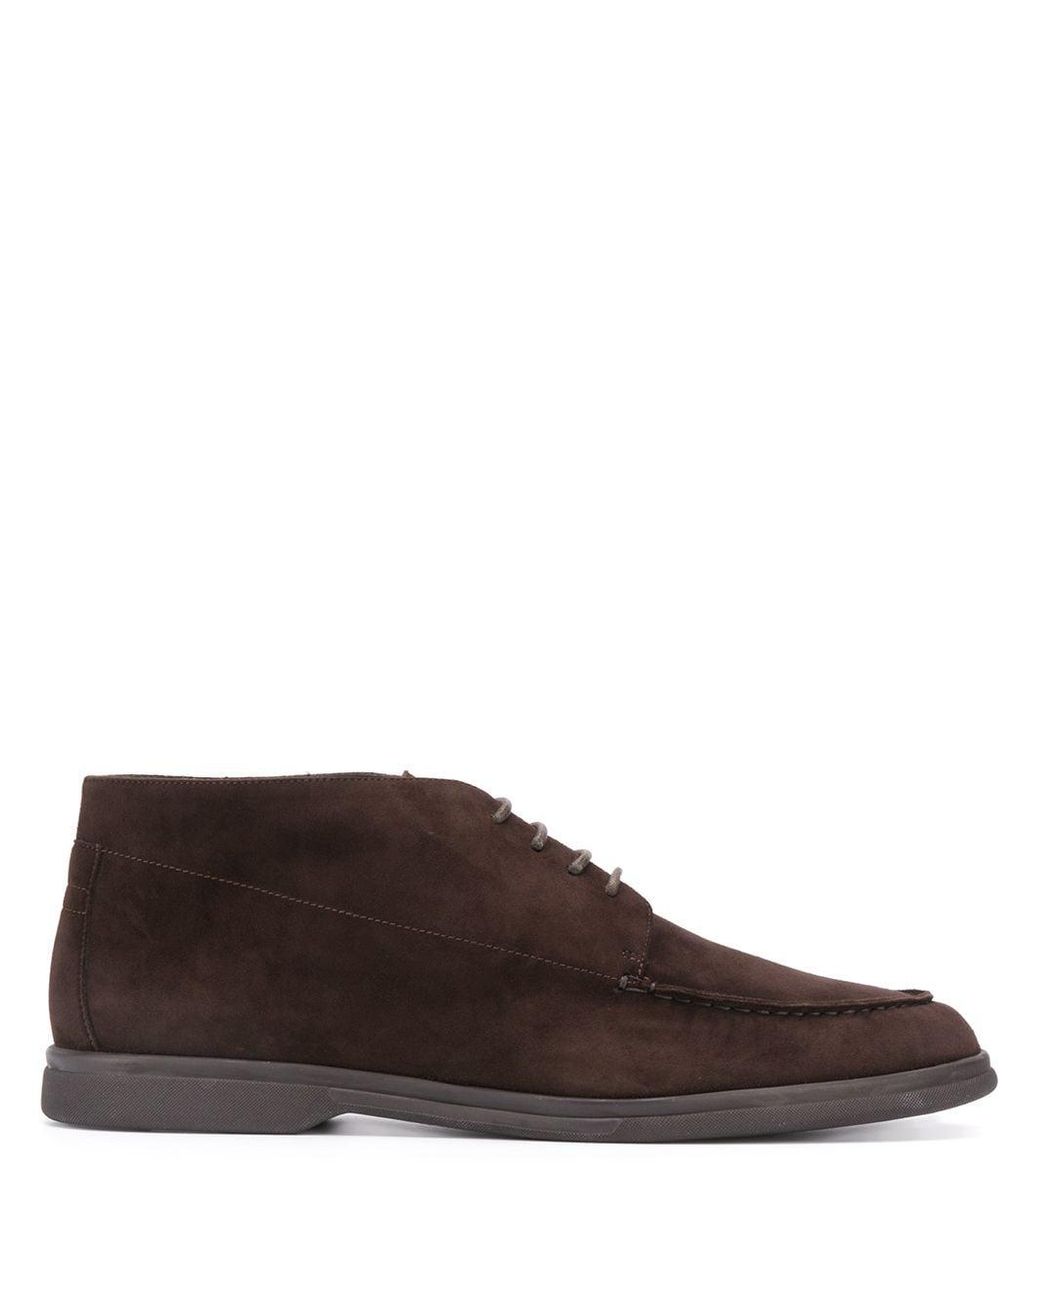 Canali Ankle Suede Desert Boots in Brown for Men - Lyst